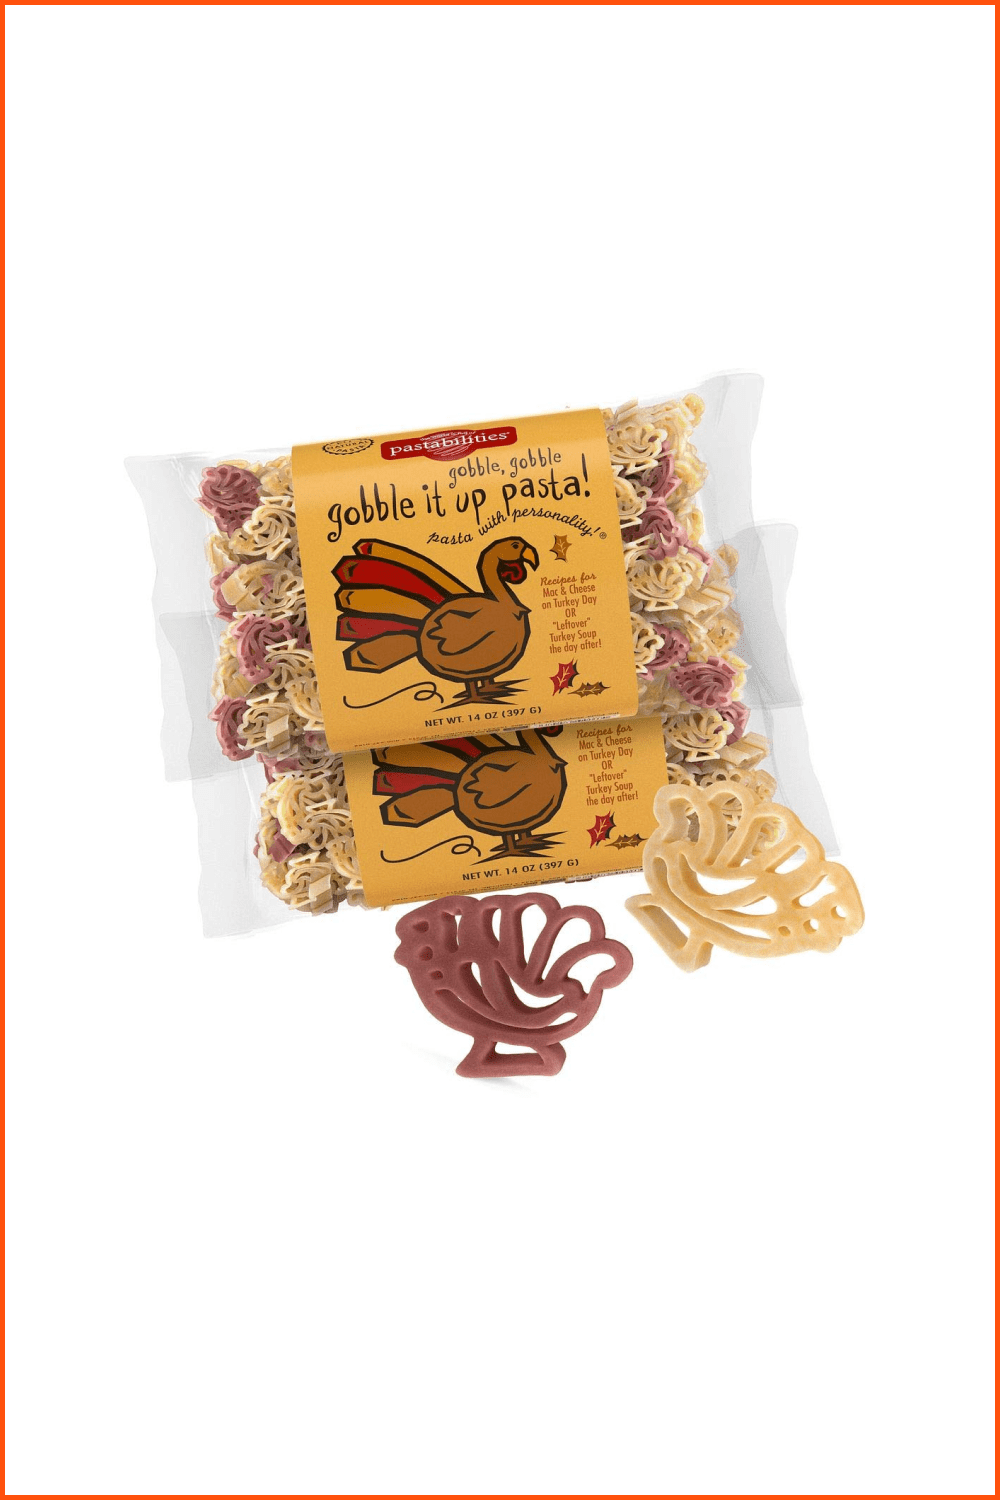 Photo of pasta packaging in the form of beige and burgundy turkeys.